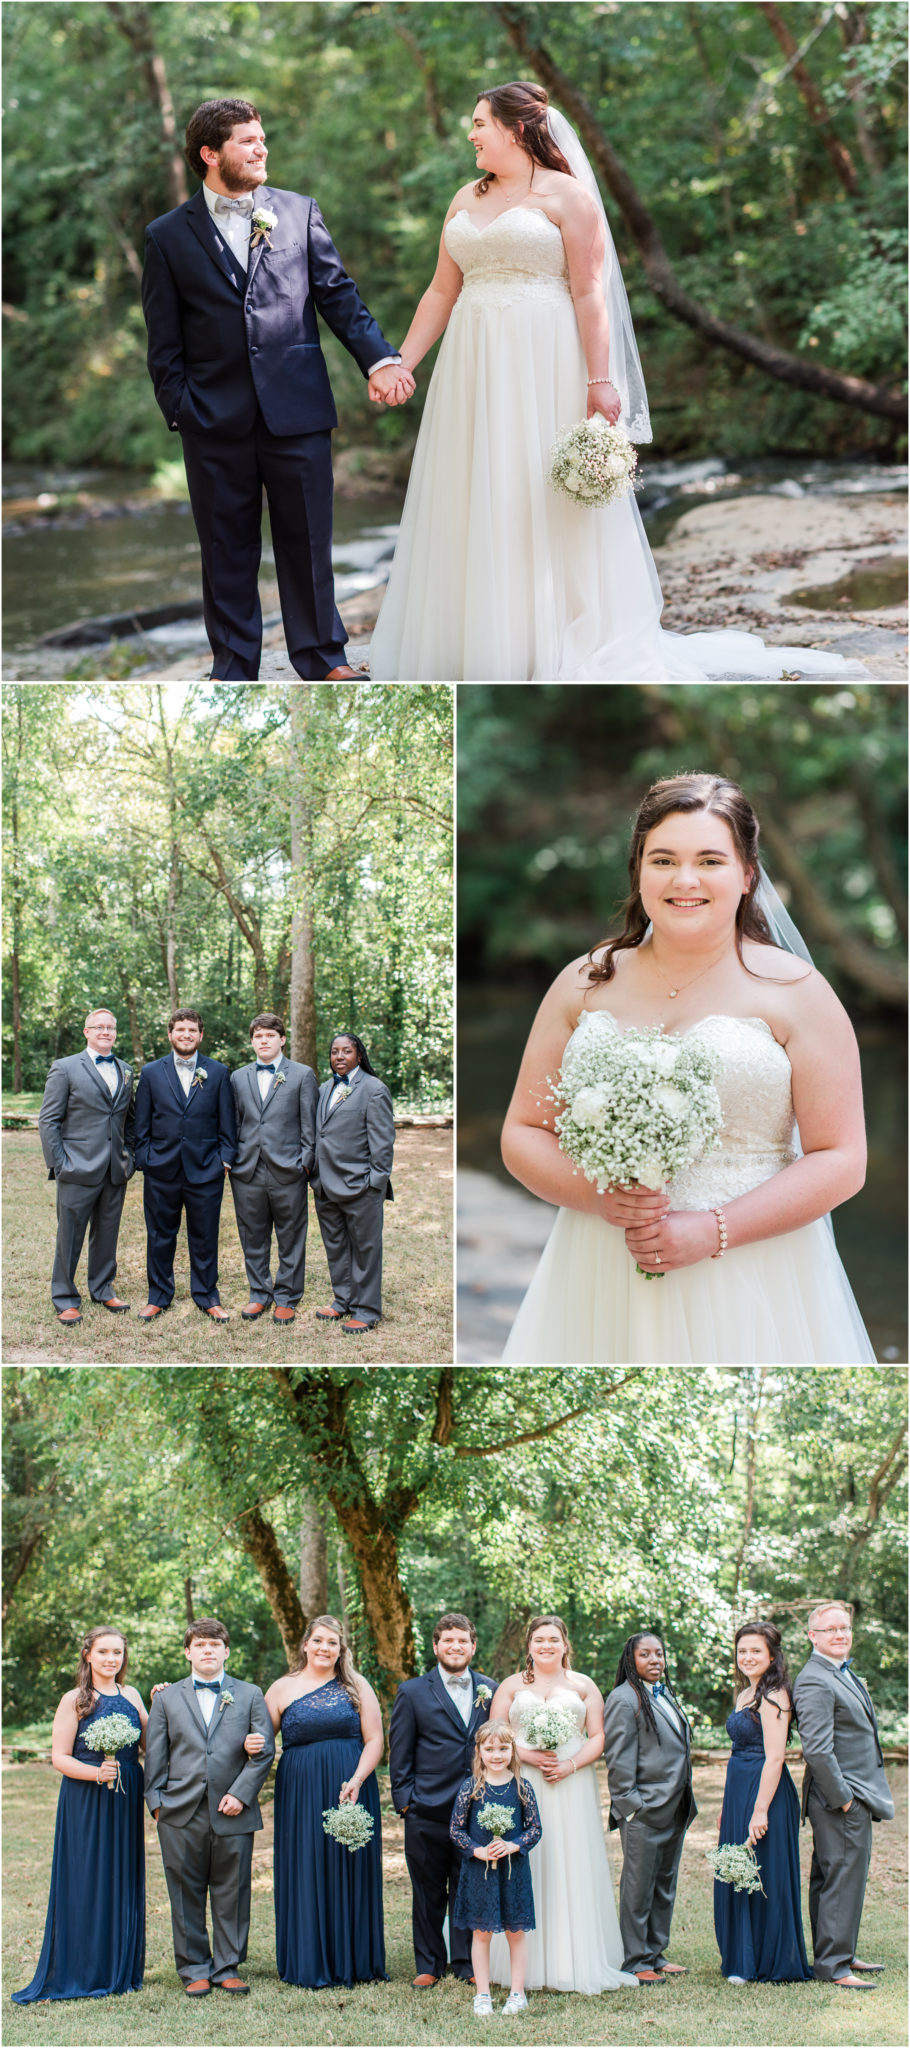 A Summer Wedding at the Barn at Greene Acres in Anderson SC Bride and Groom Photos